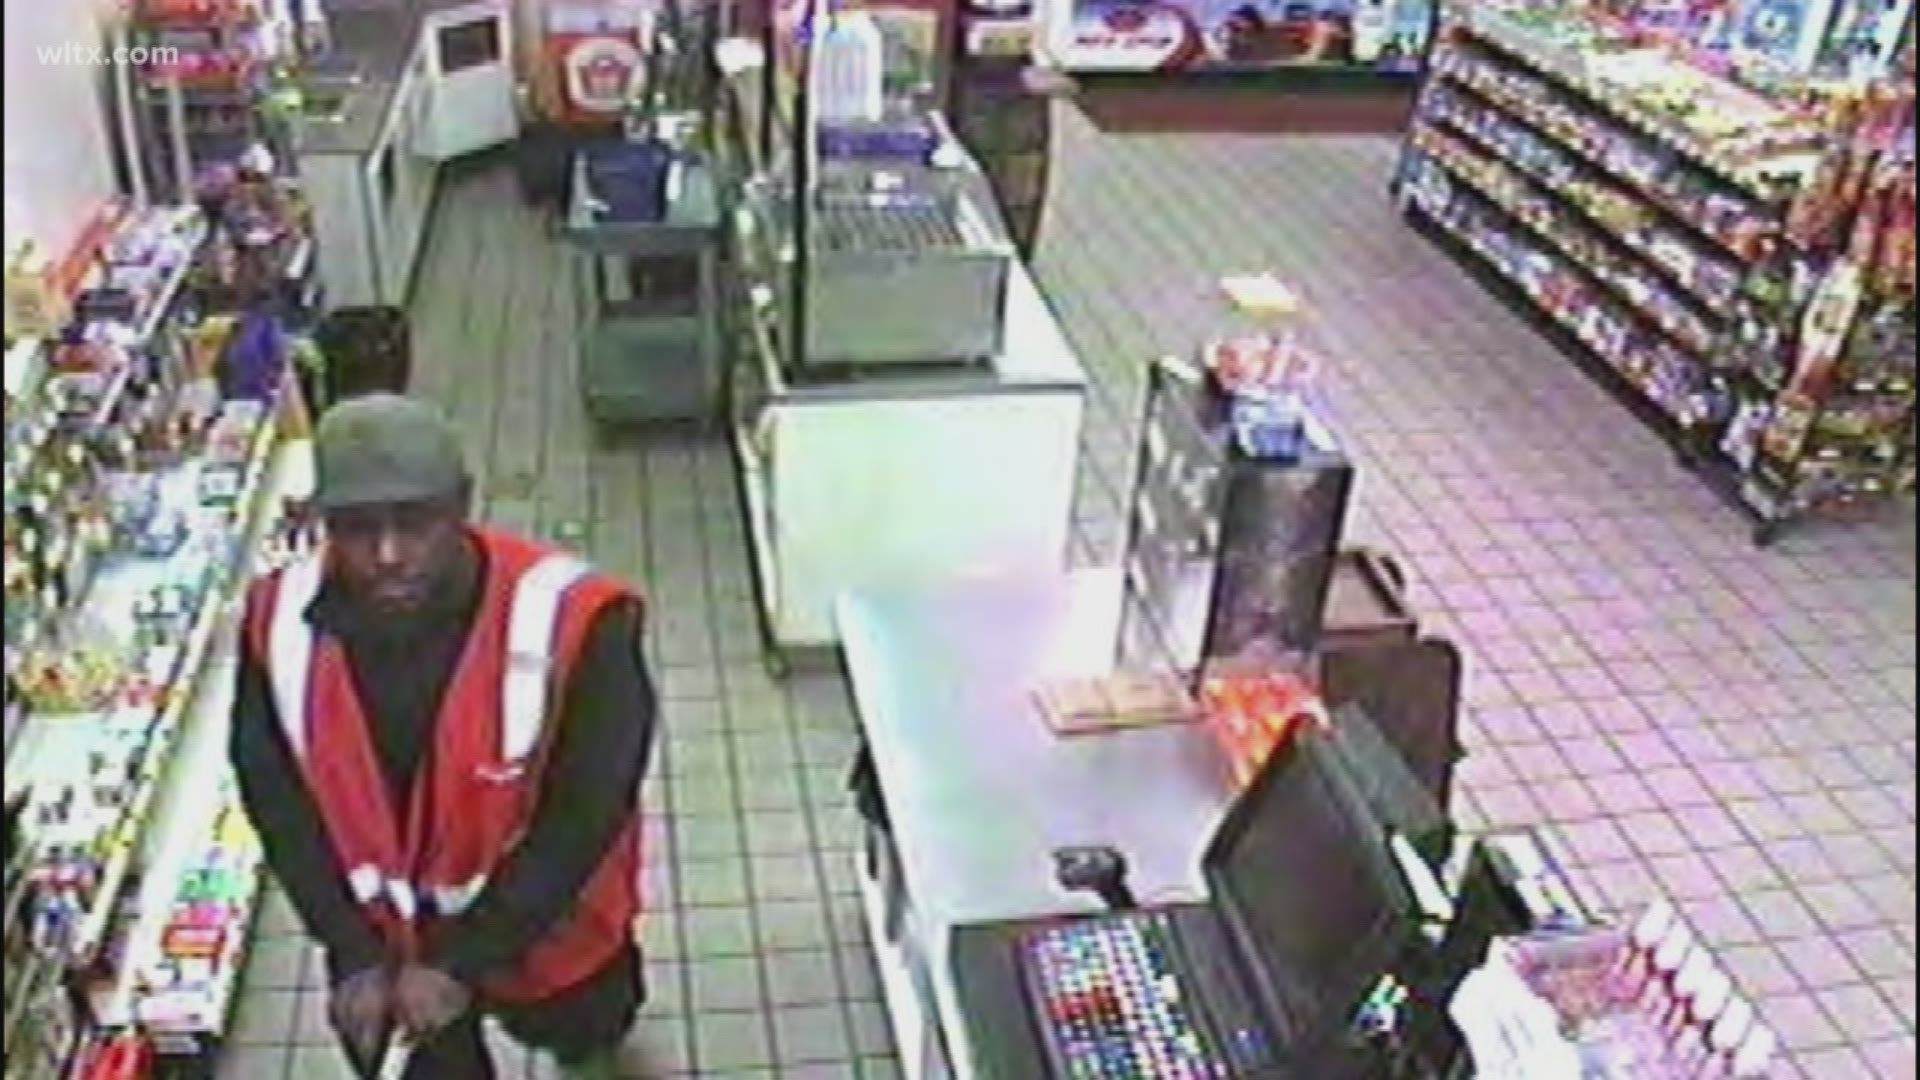 Lexington Police are asking for the public's help in locating a man wanted in connection to an armed robbery at the Pitt Stop in Lexington.